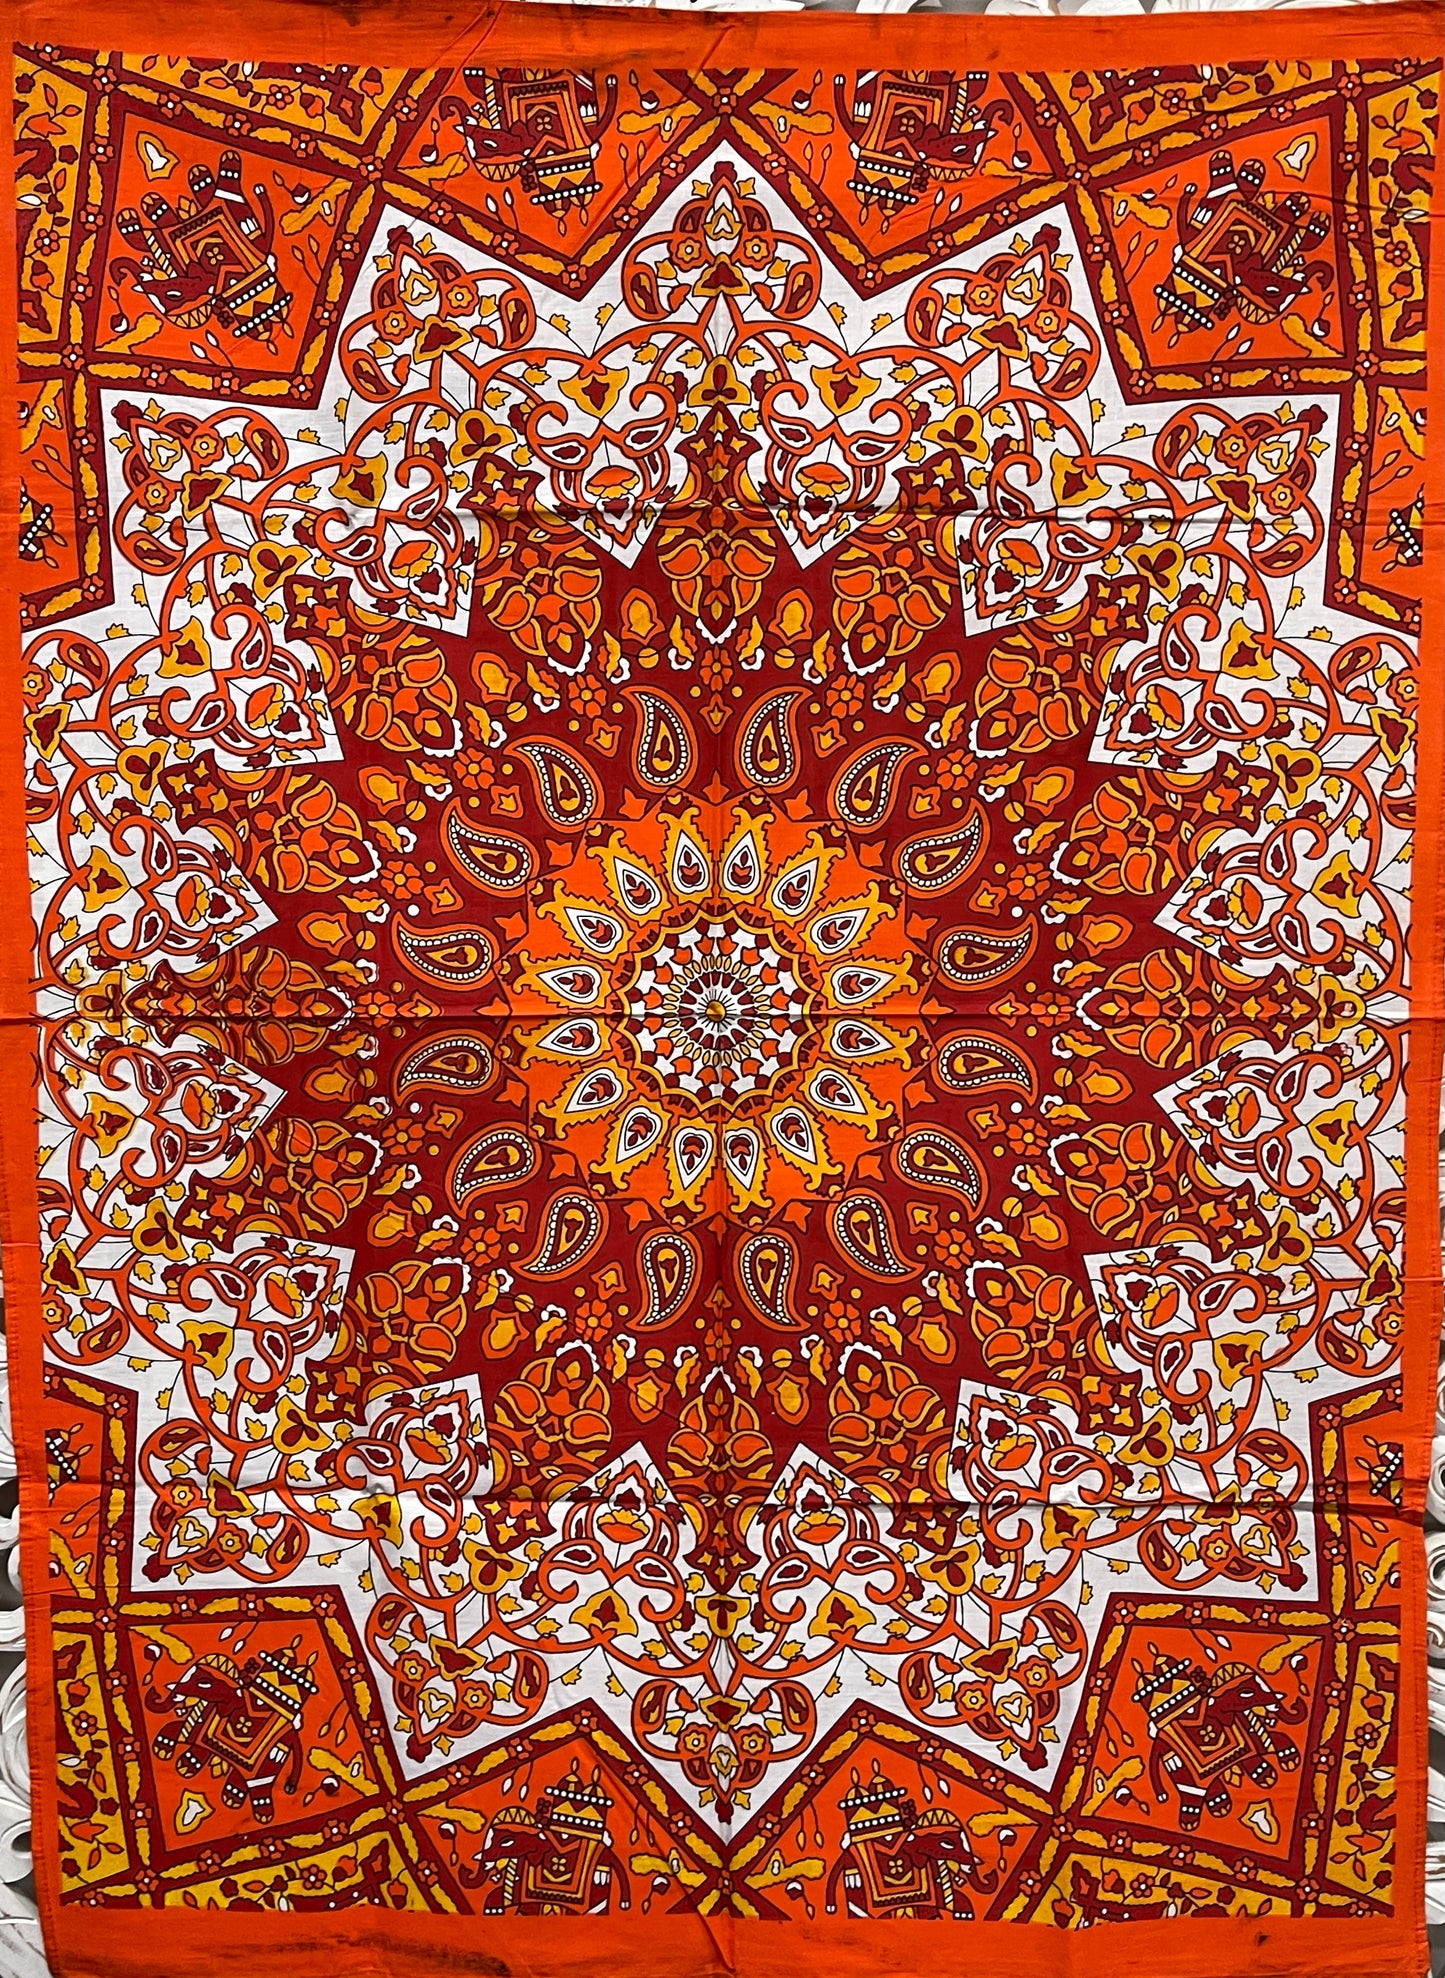 Hand printed Mandala Fabric Poster Tapestries- 5 Colors Available